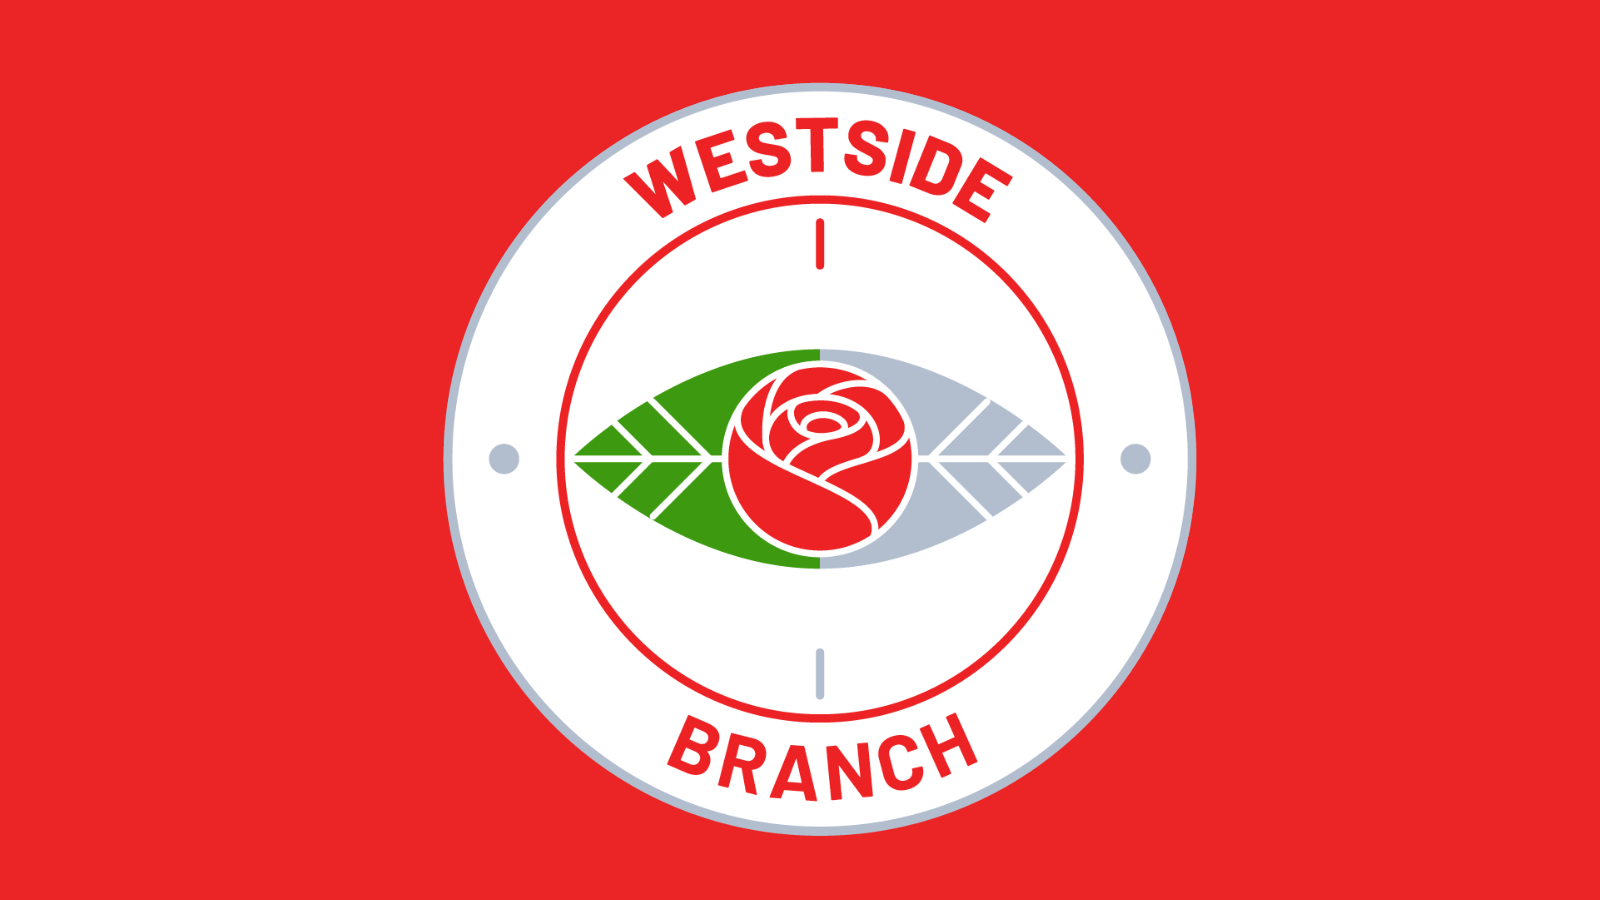 Logo for the Westside Branch of DSA-LA. Includes a red rose graphic within a design meant to evoke a compass.